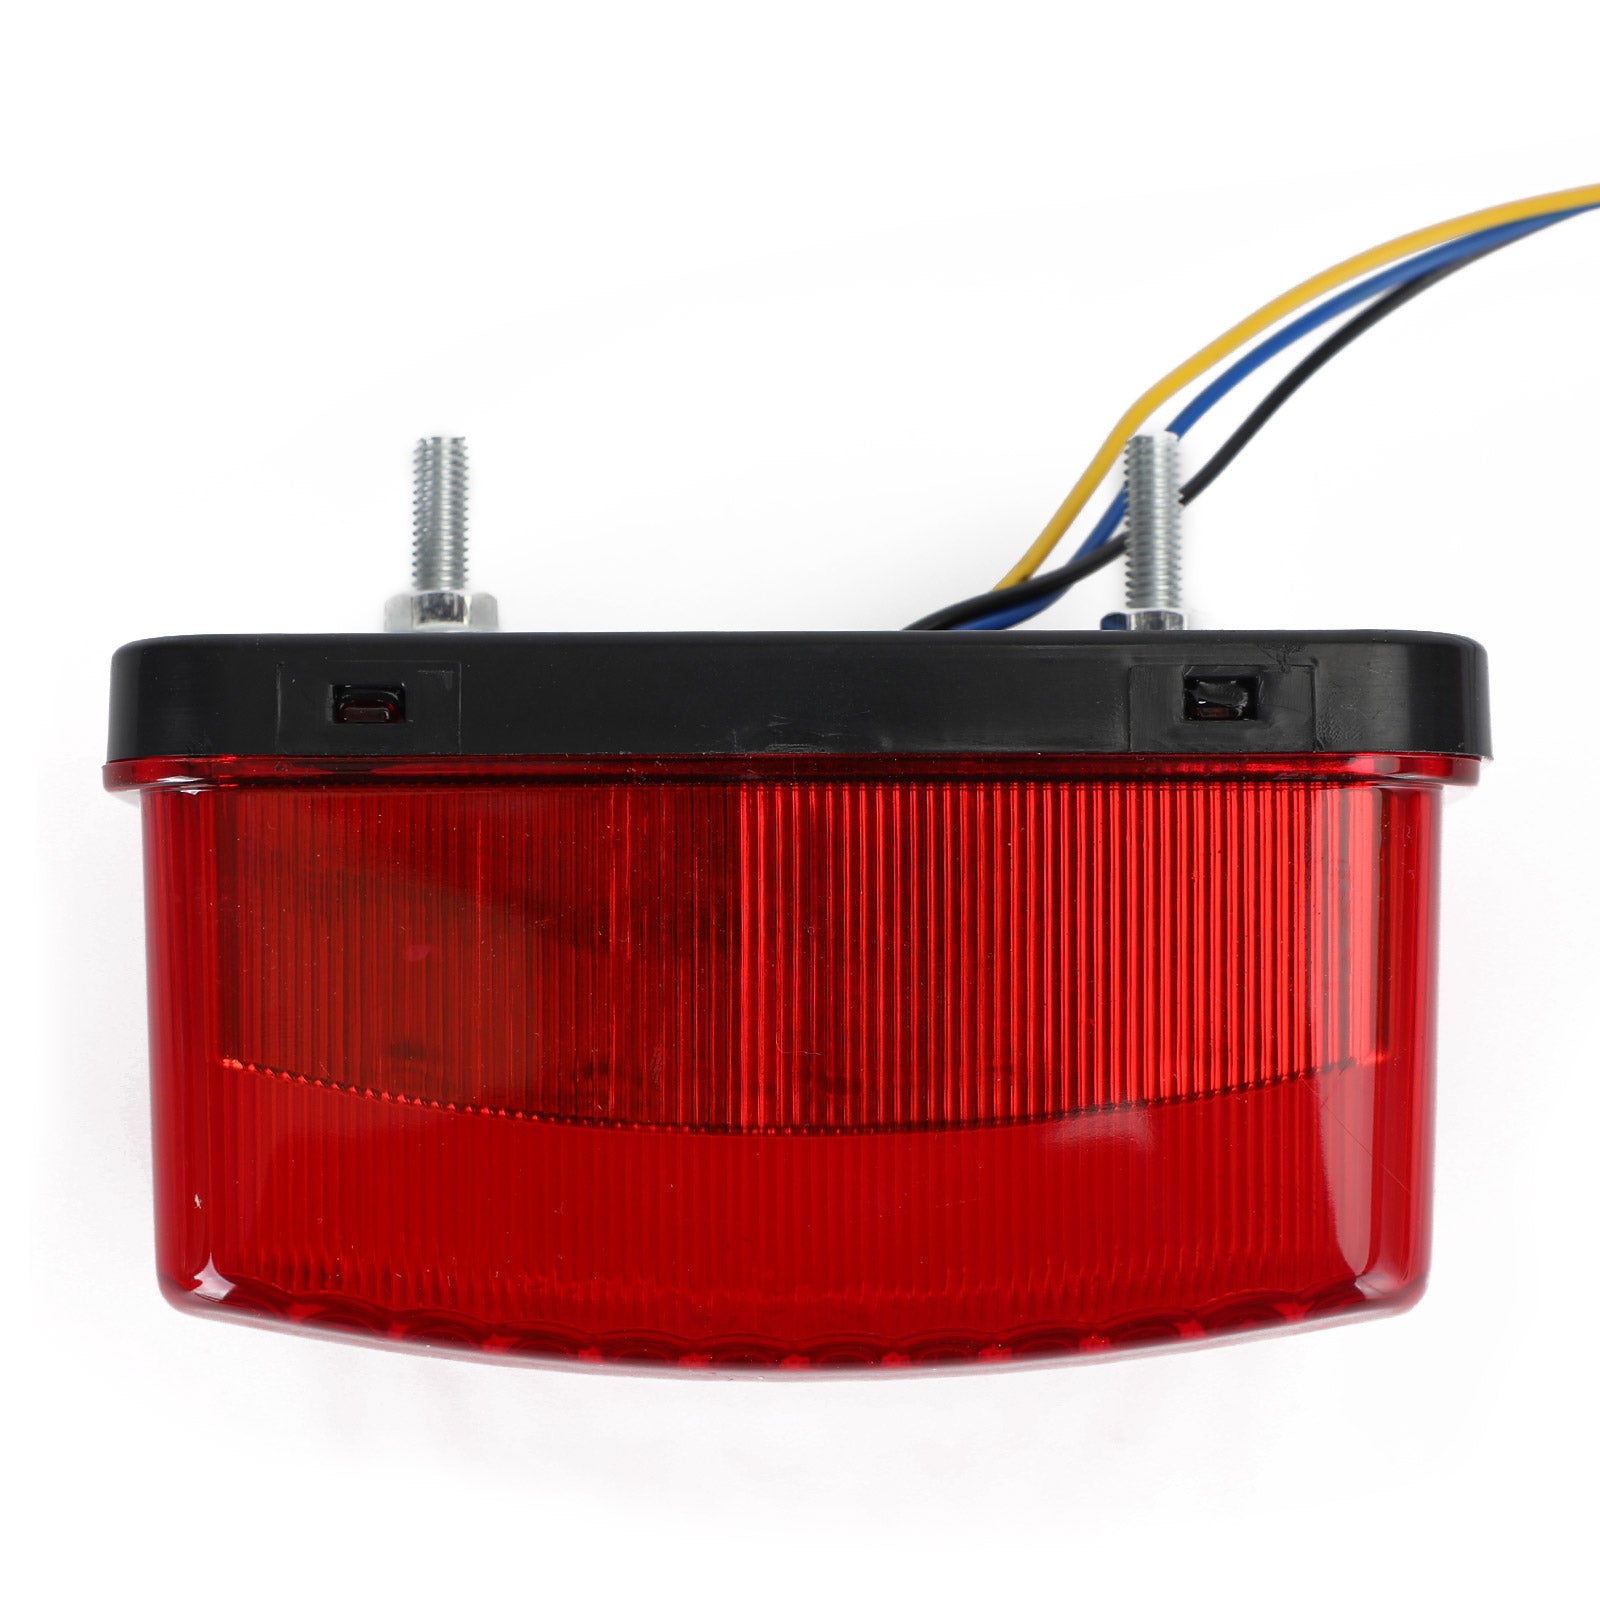 Fanale posteriore a LED per Yamaha Viking Bruin Wolverine 660 450 350 400 Rosso